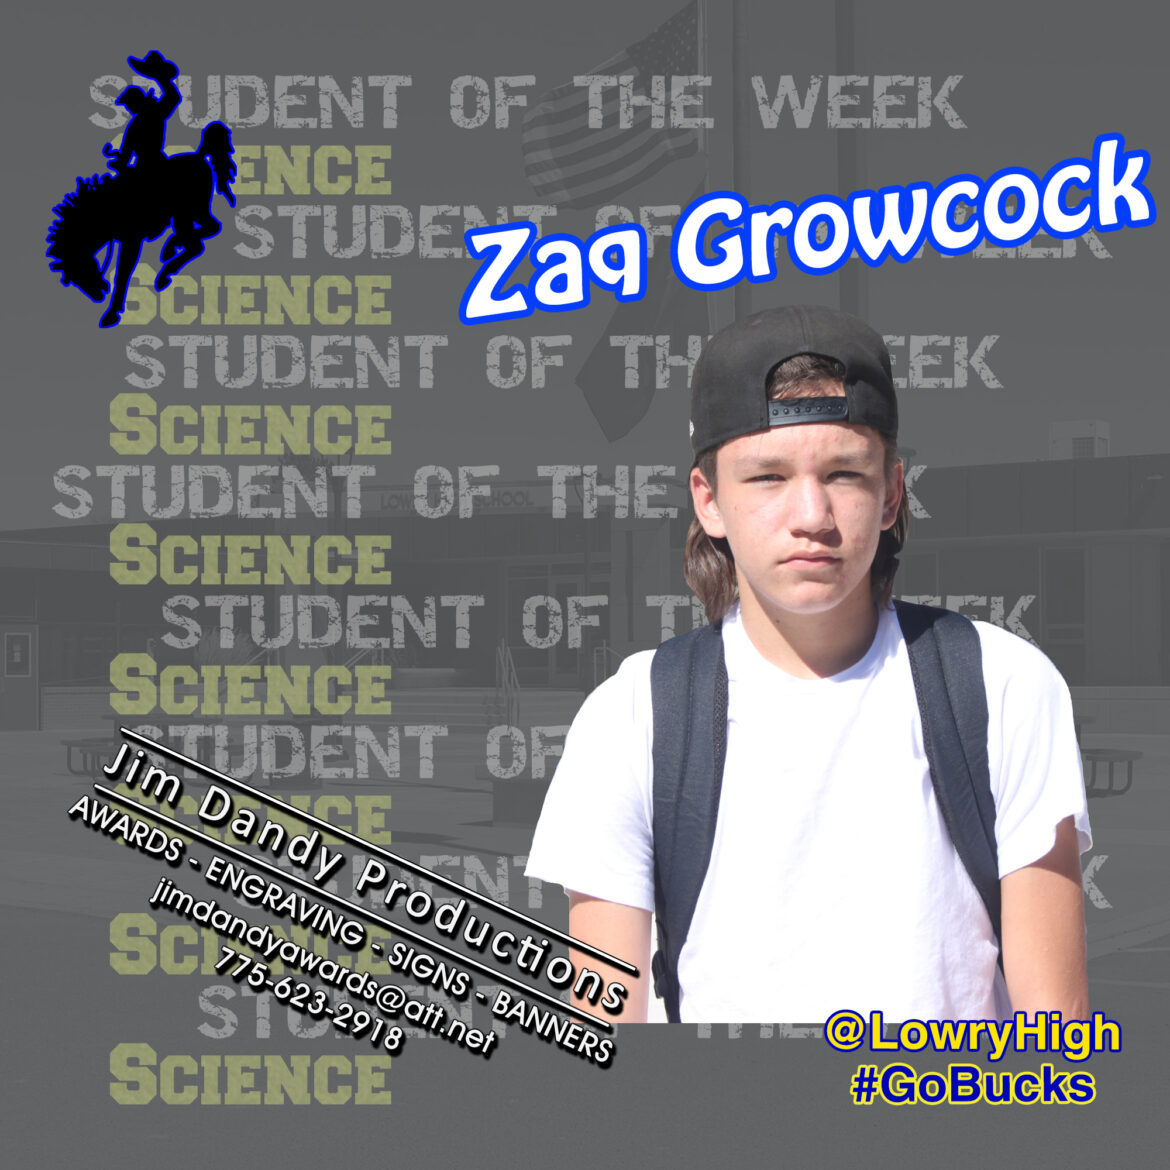 Zaquery Growcock named Student of the Week in Science